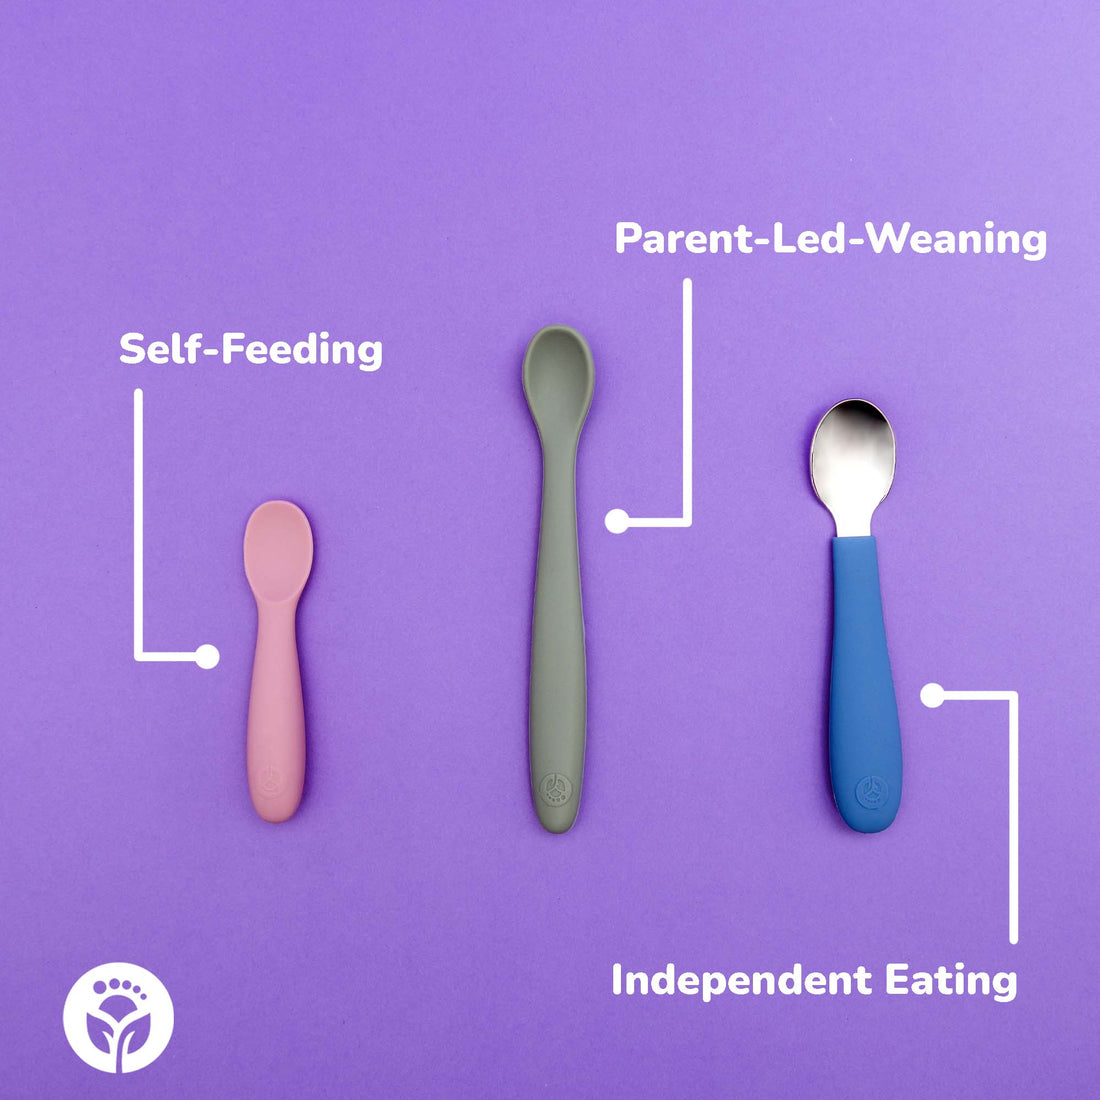 Baby Spoons - Self Feeding Set For Baby Led Weaning - Food Grade